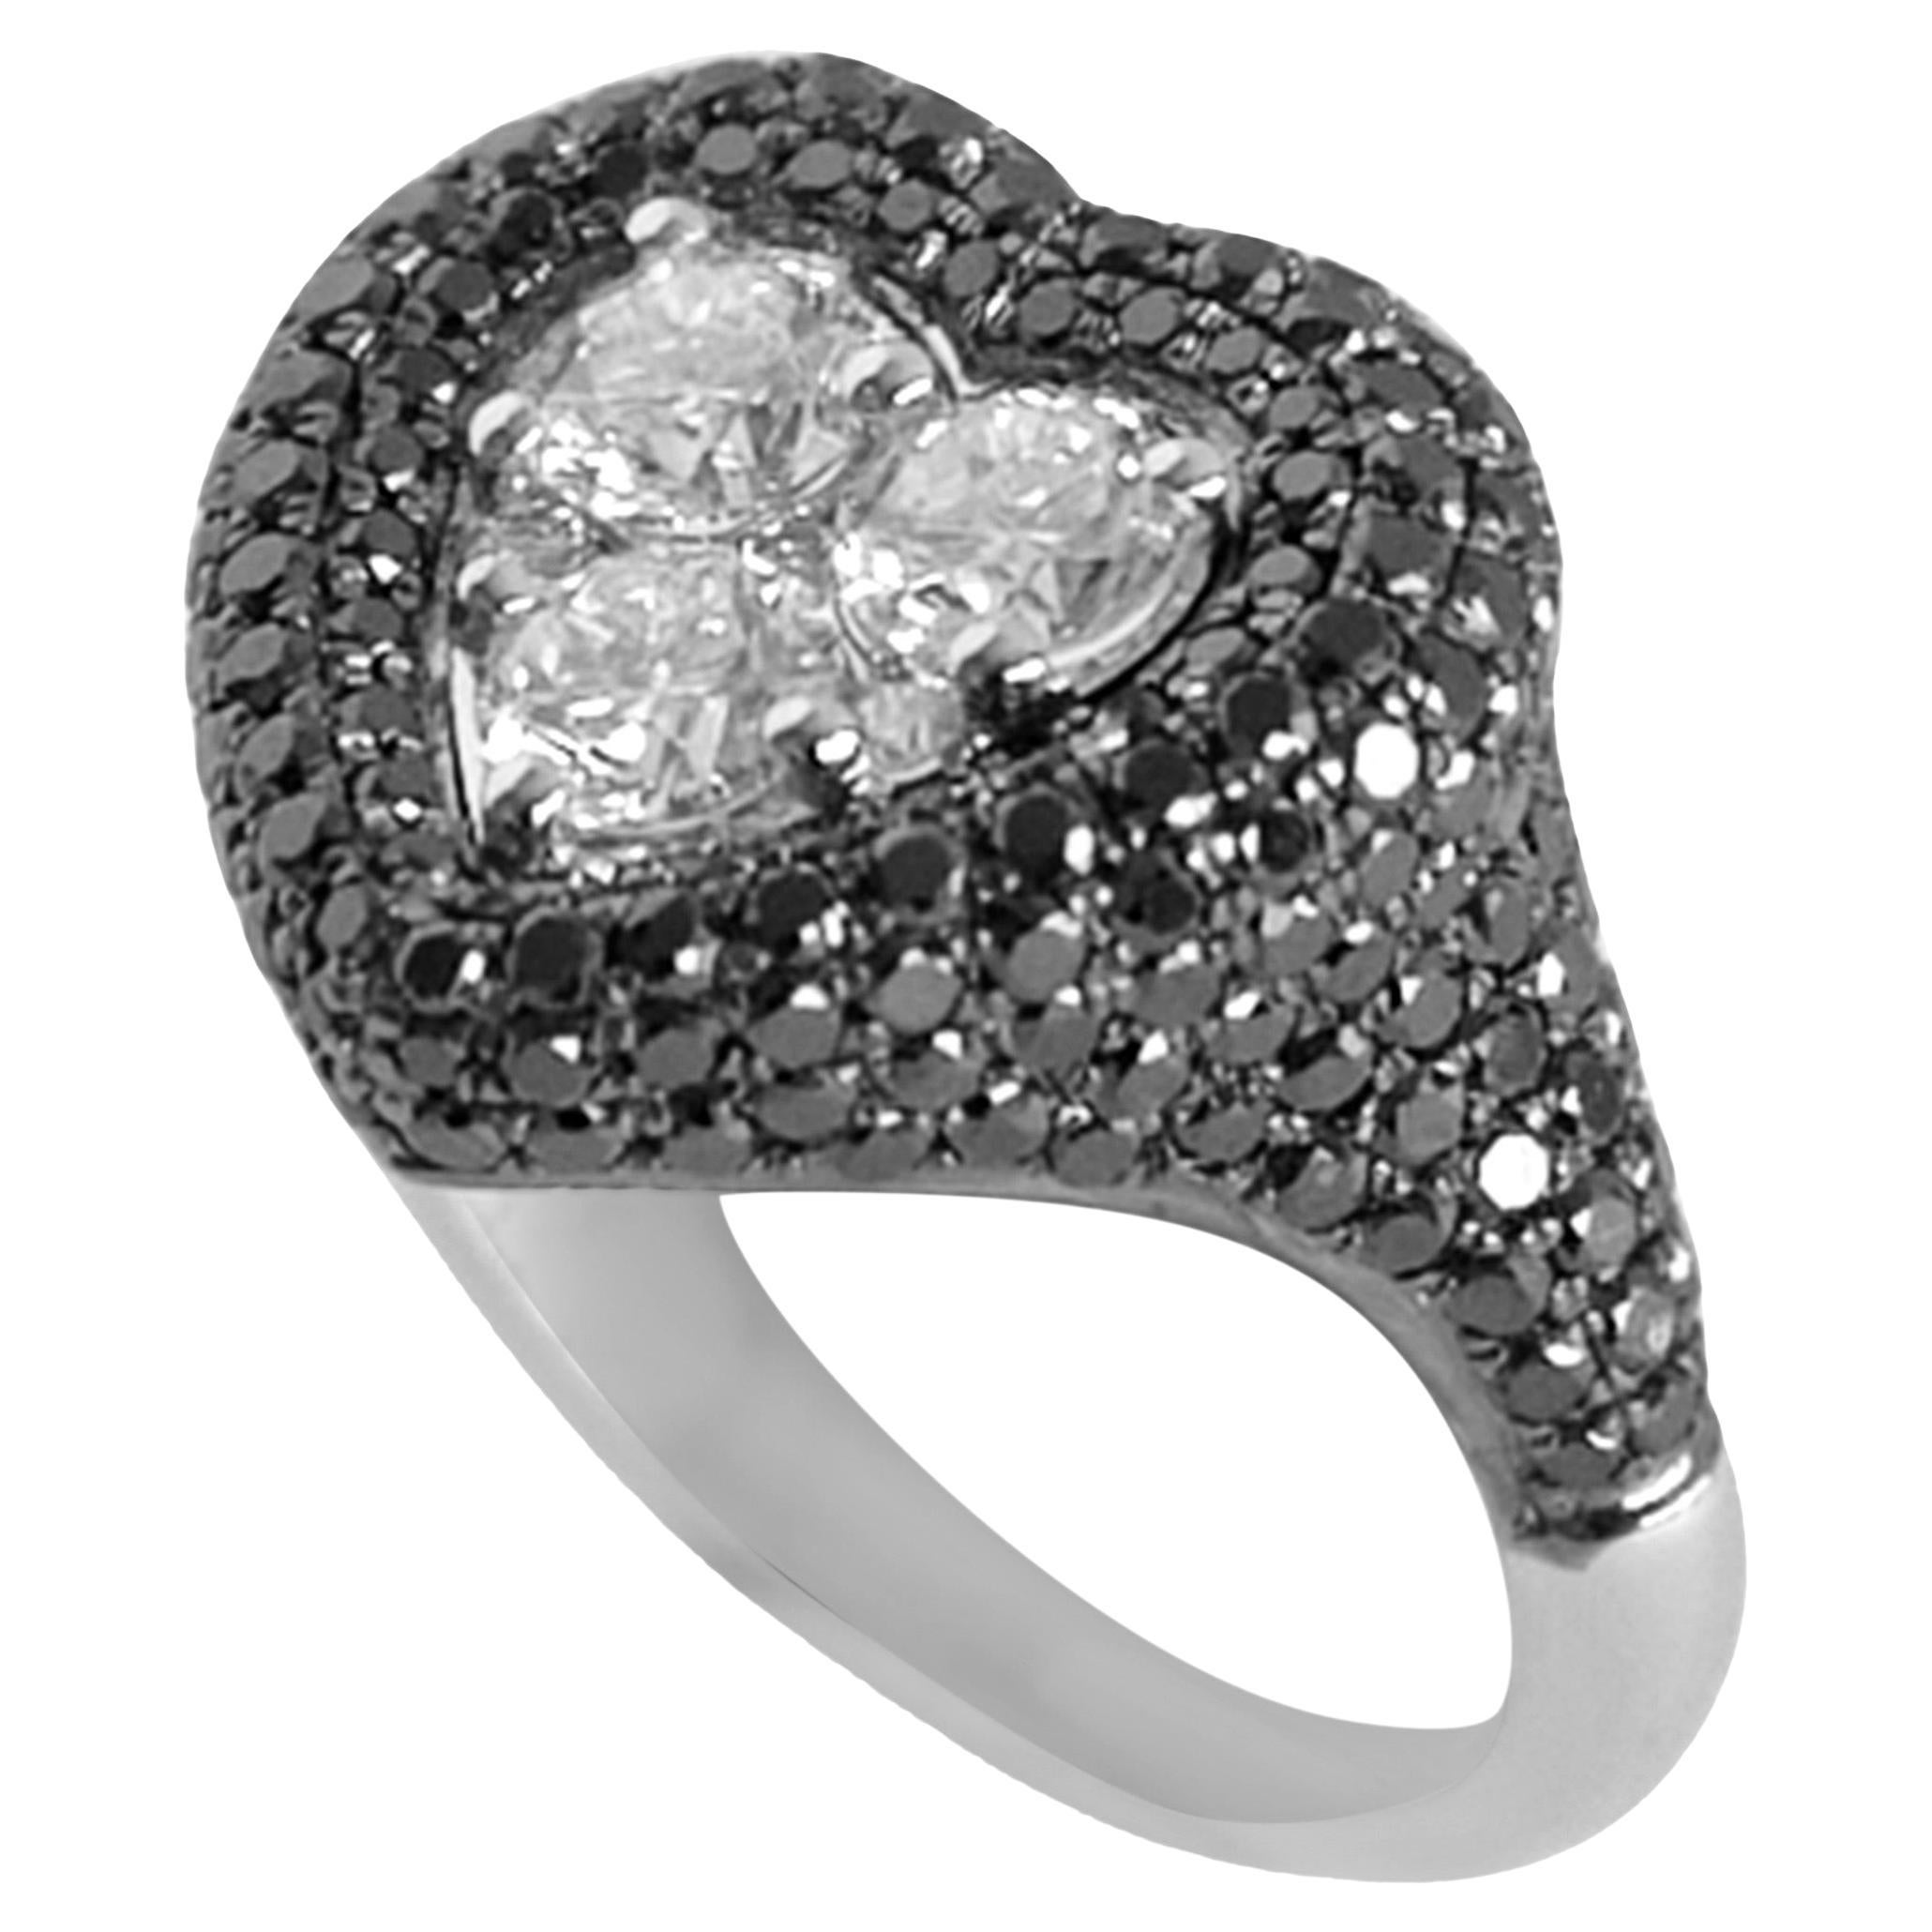 For Sale:  Manaal Heart Pinky Ring, 1.93 Carat Diamonds, Fashion Ring